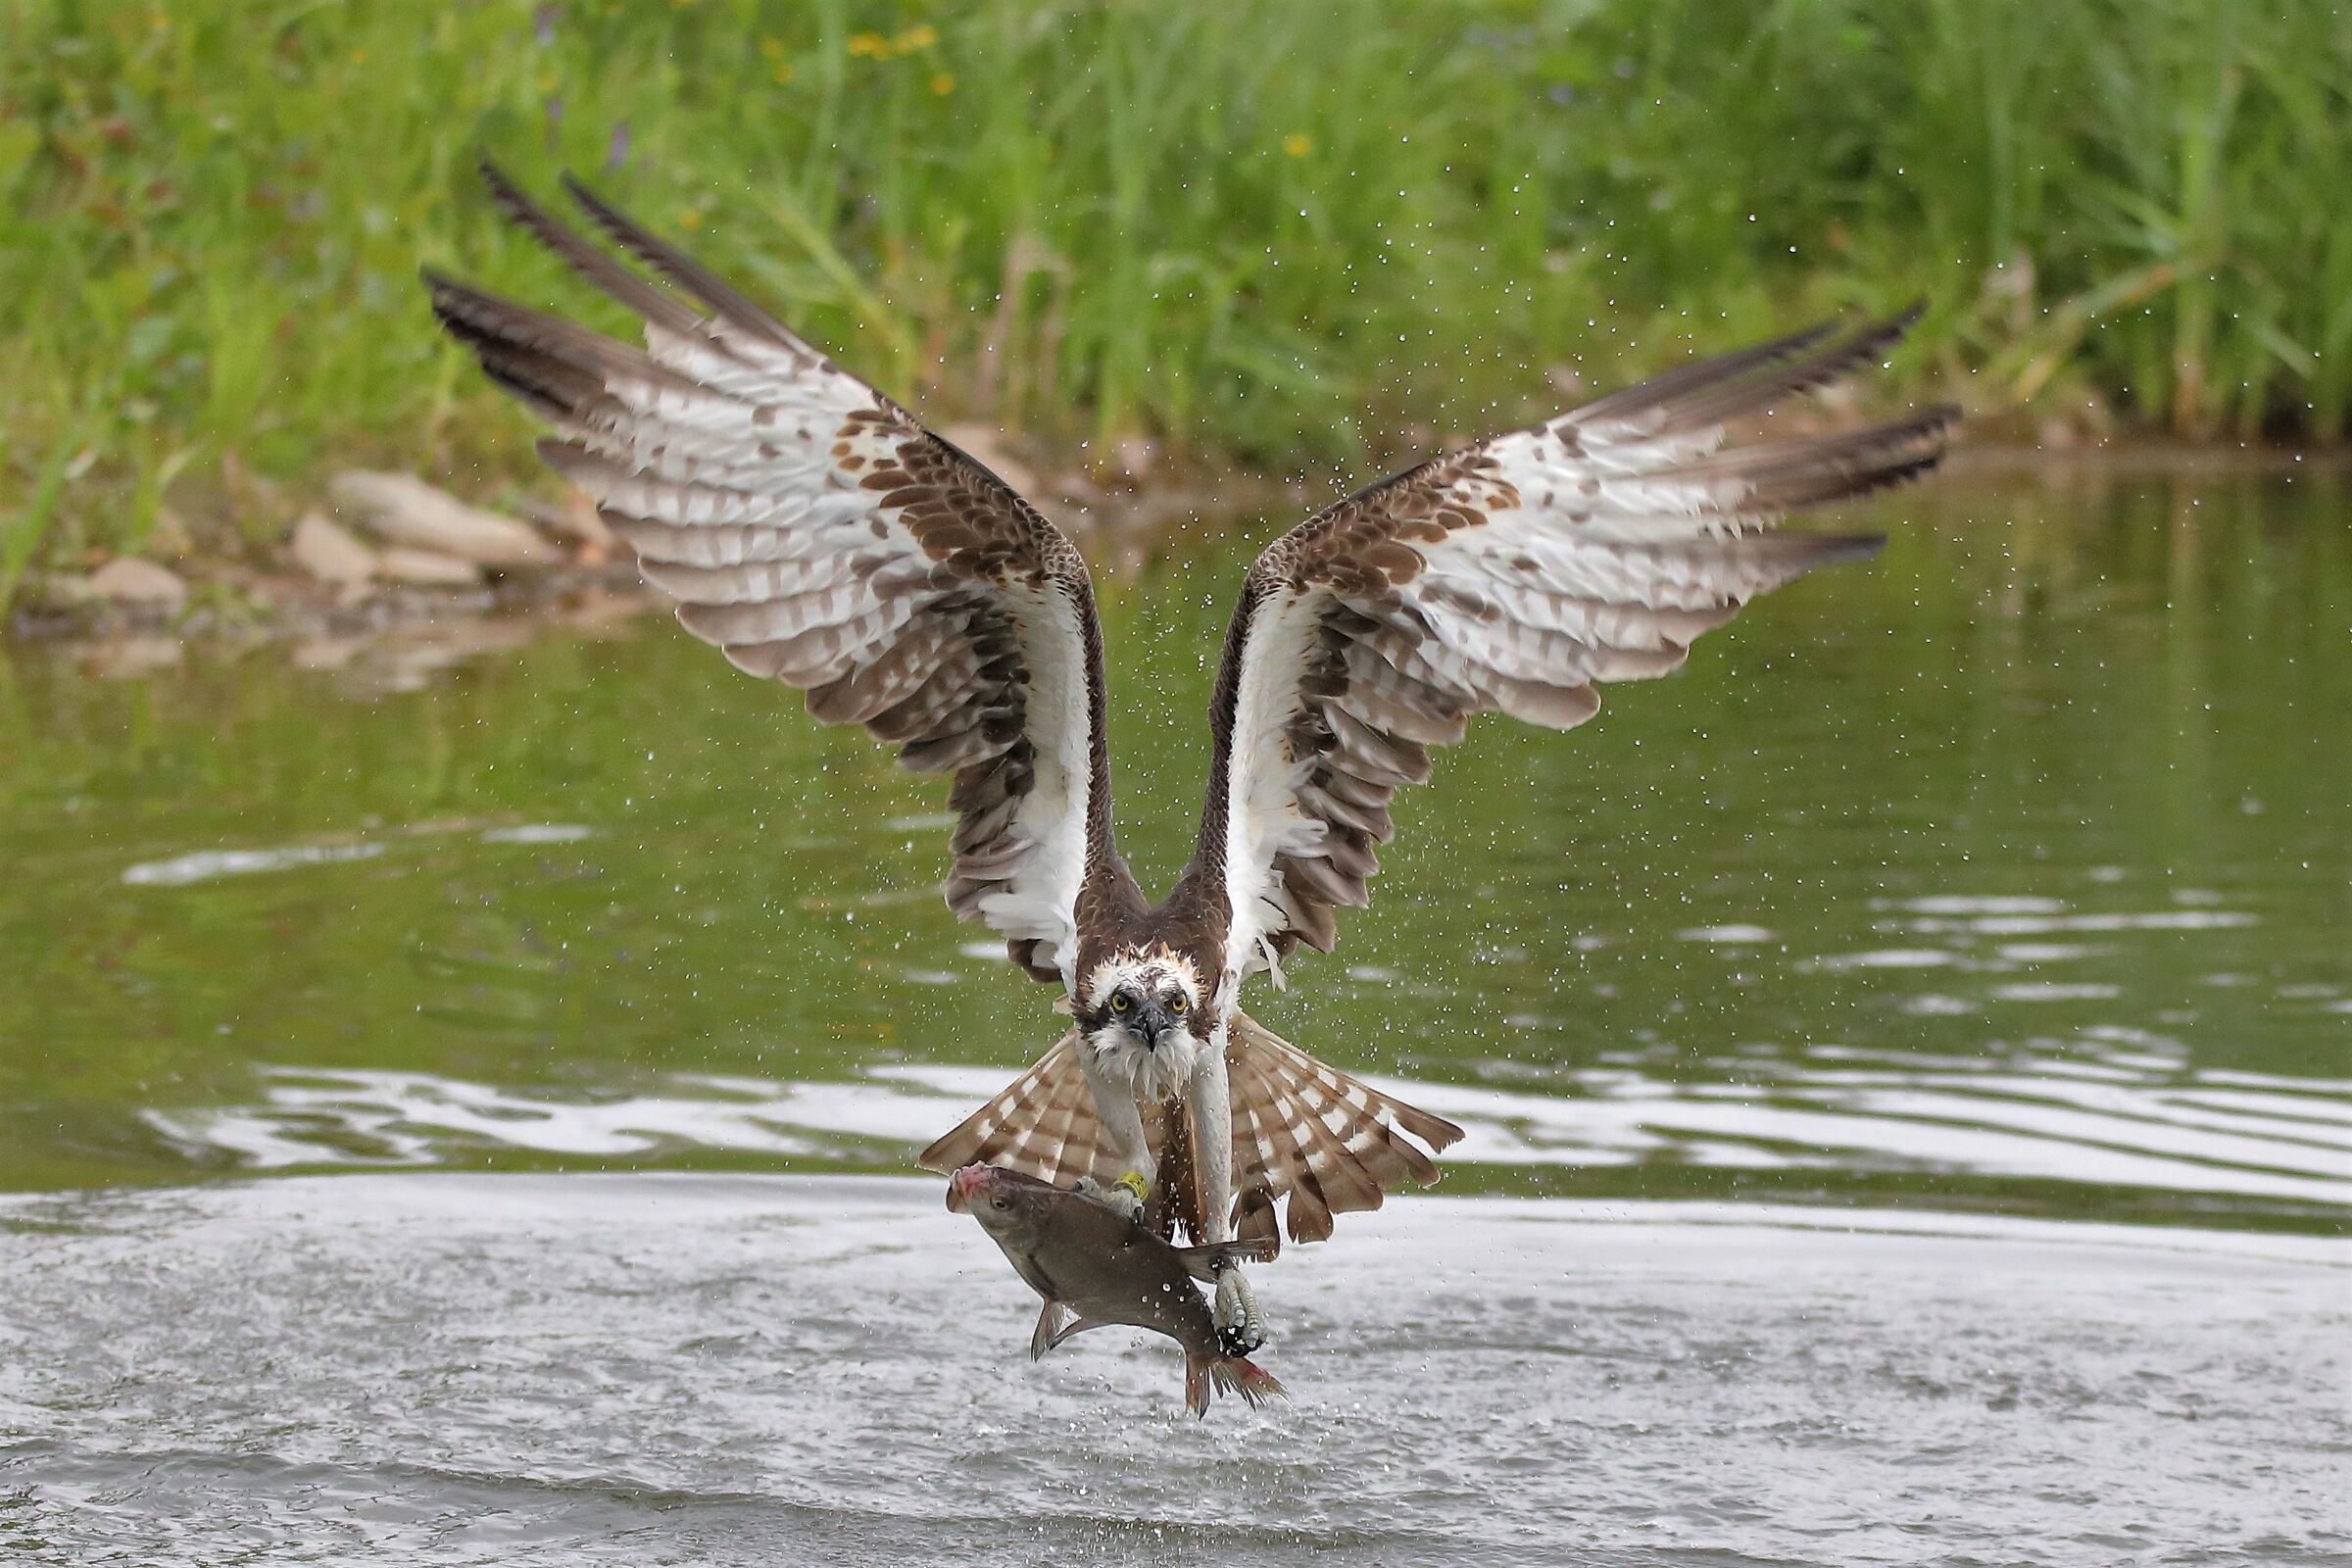 Another osprey...